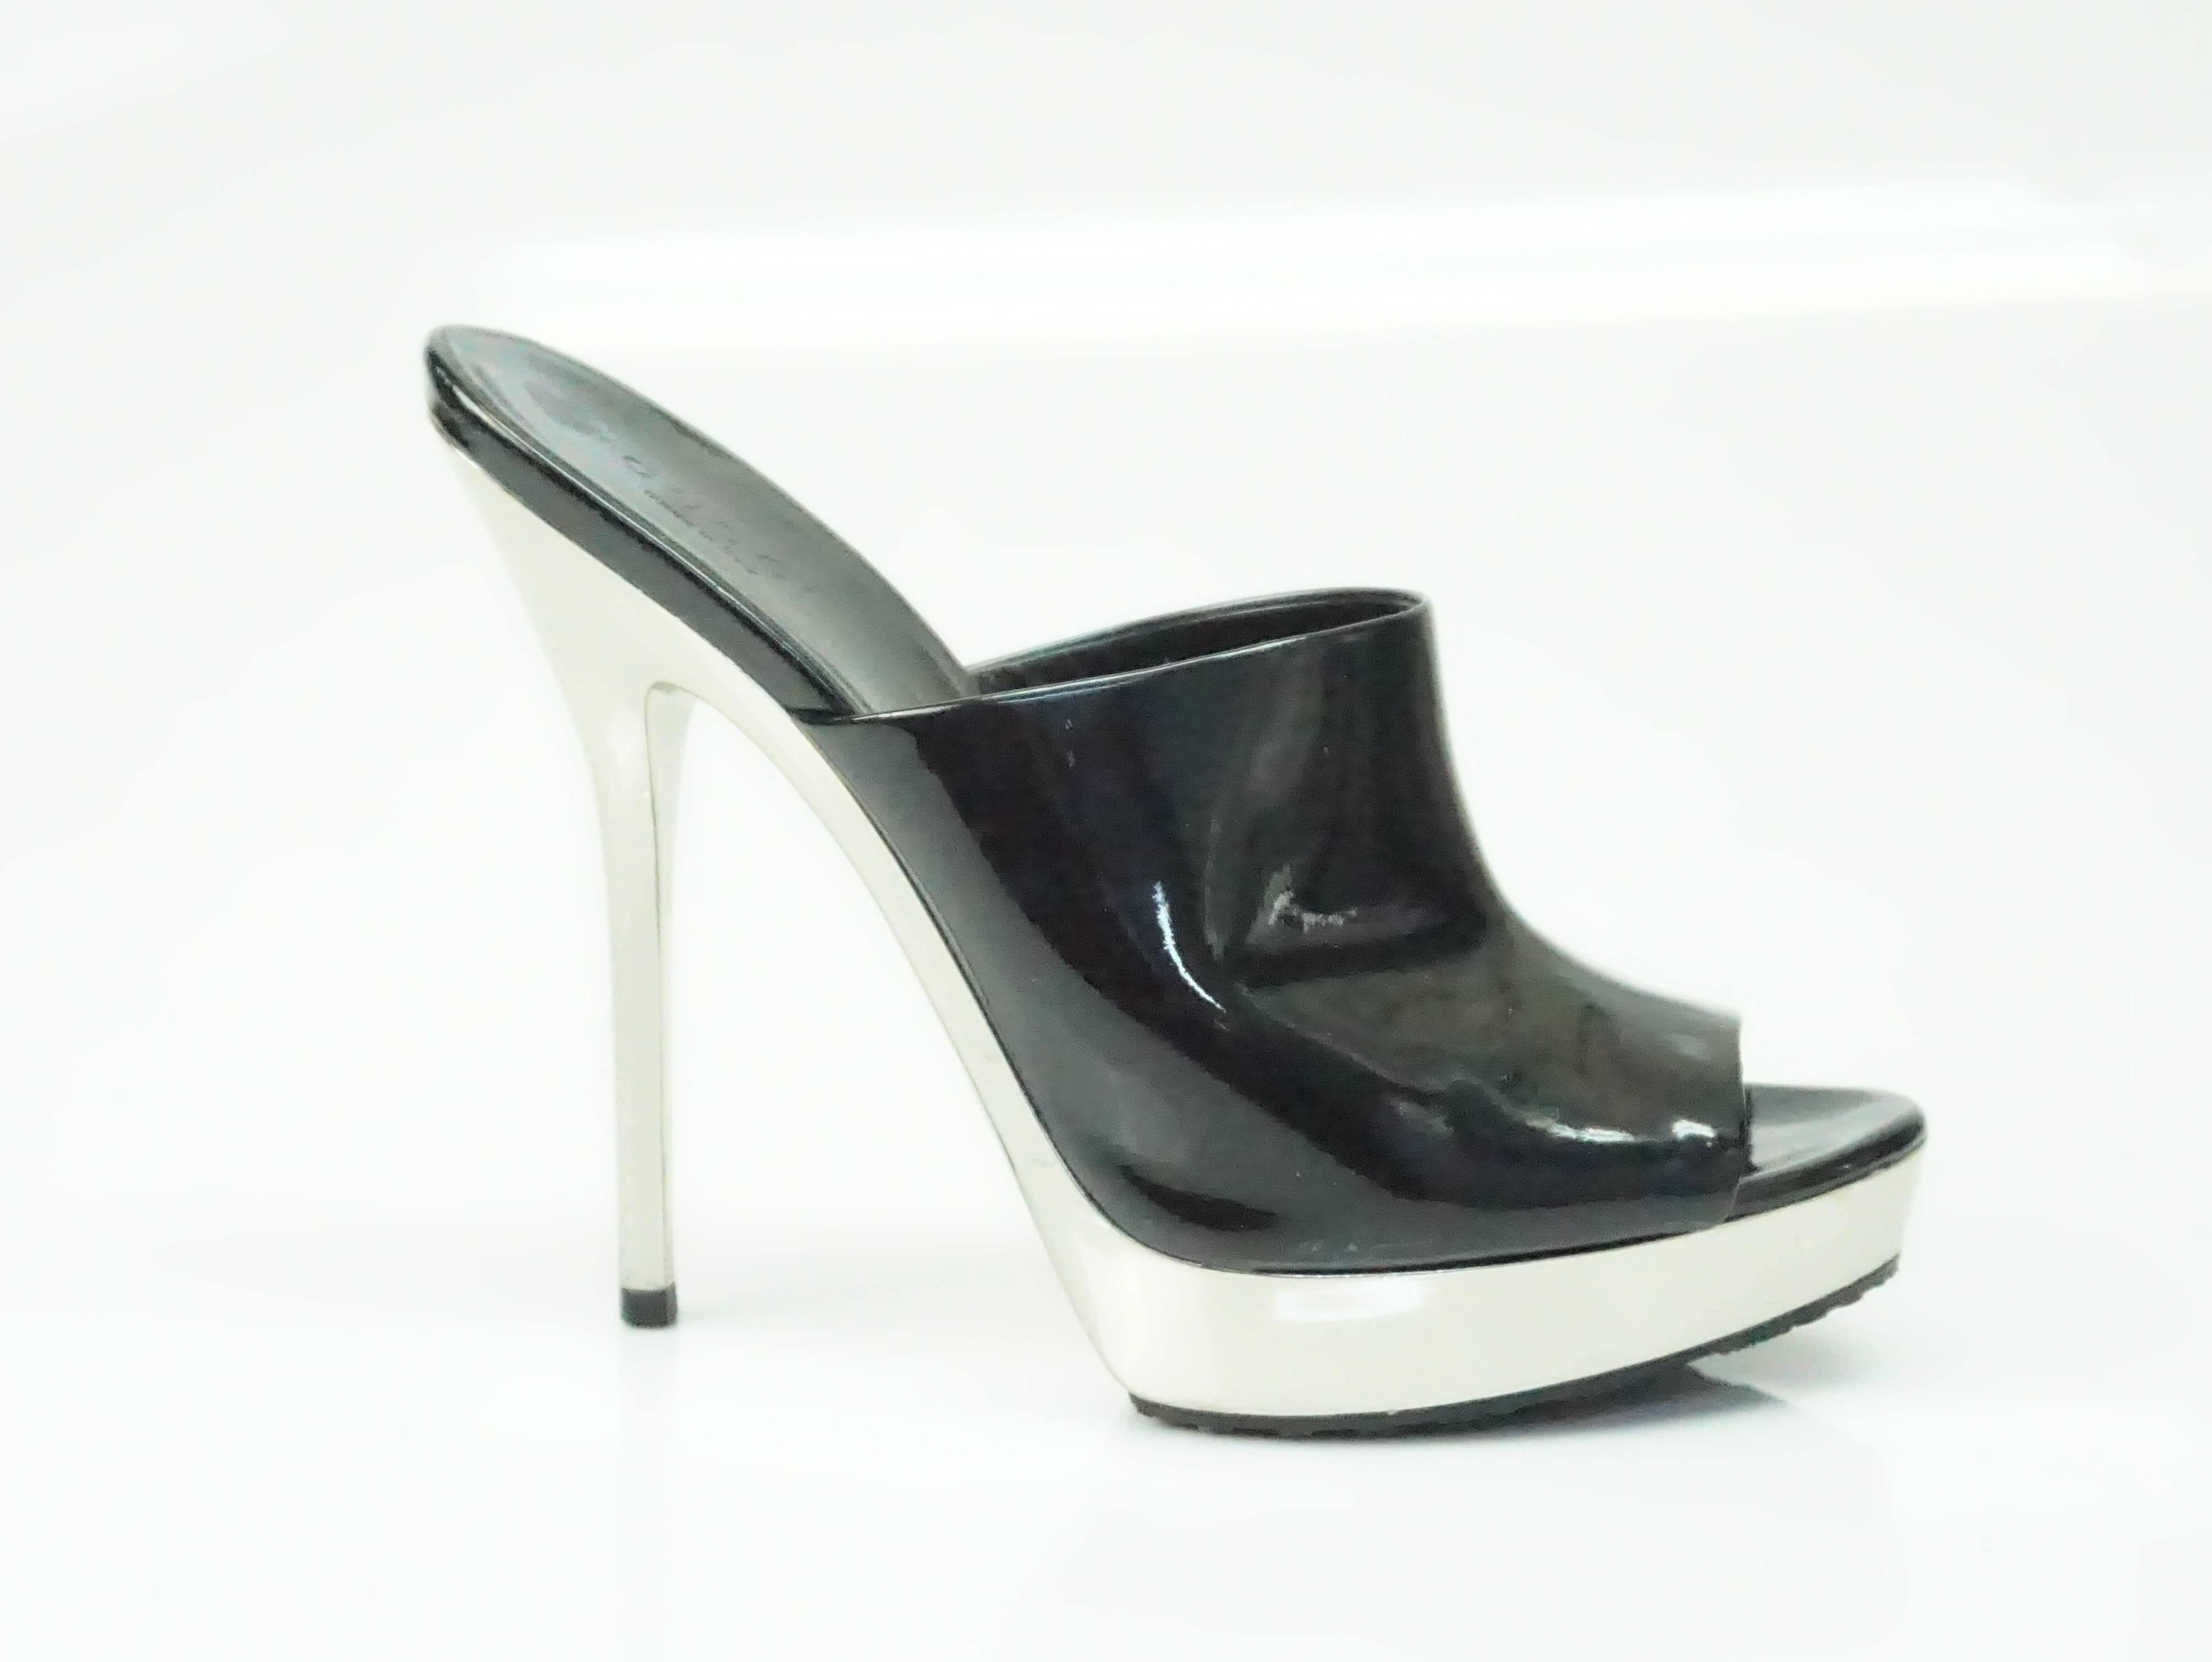 Gucci Black Patent Leather Platform Slide Sandal Heel - 36 These beautiful Gucci pumps are in excellent condition. There are a few scratches near the toe area and around platform. 
Heel length: 5